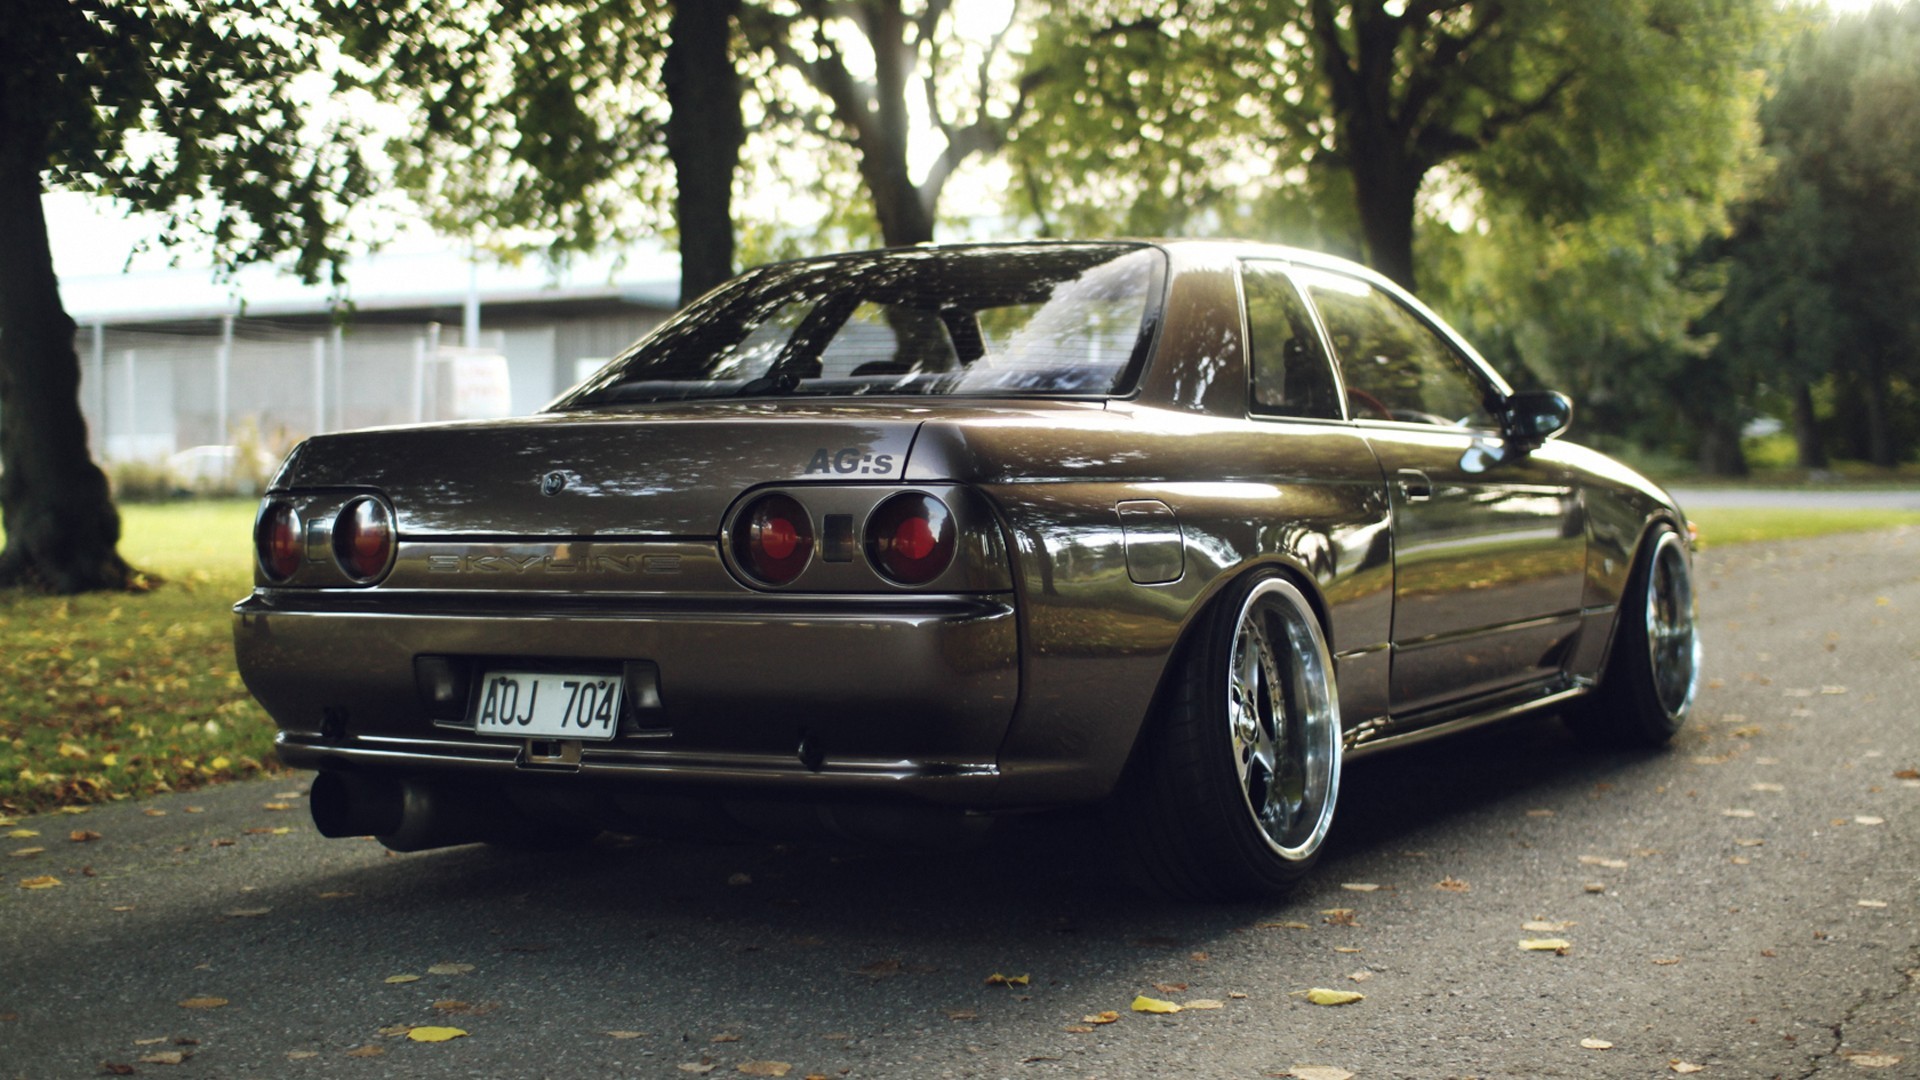 General 1920x1080 car Nissan Skyline R32 stance (cars) tuning low car Japanese cars Nissan numbers Nissan Skyline